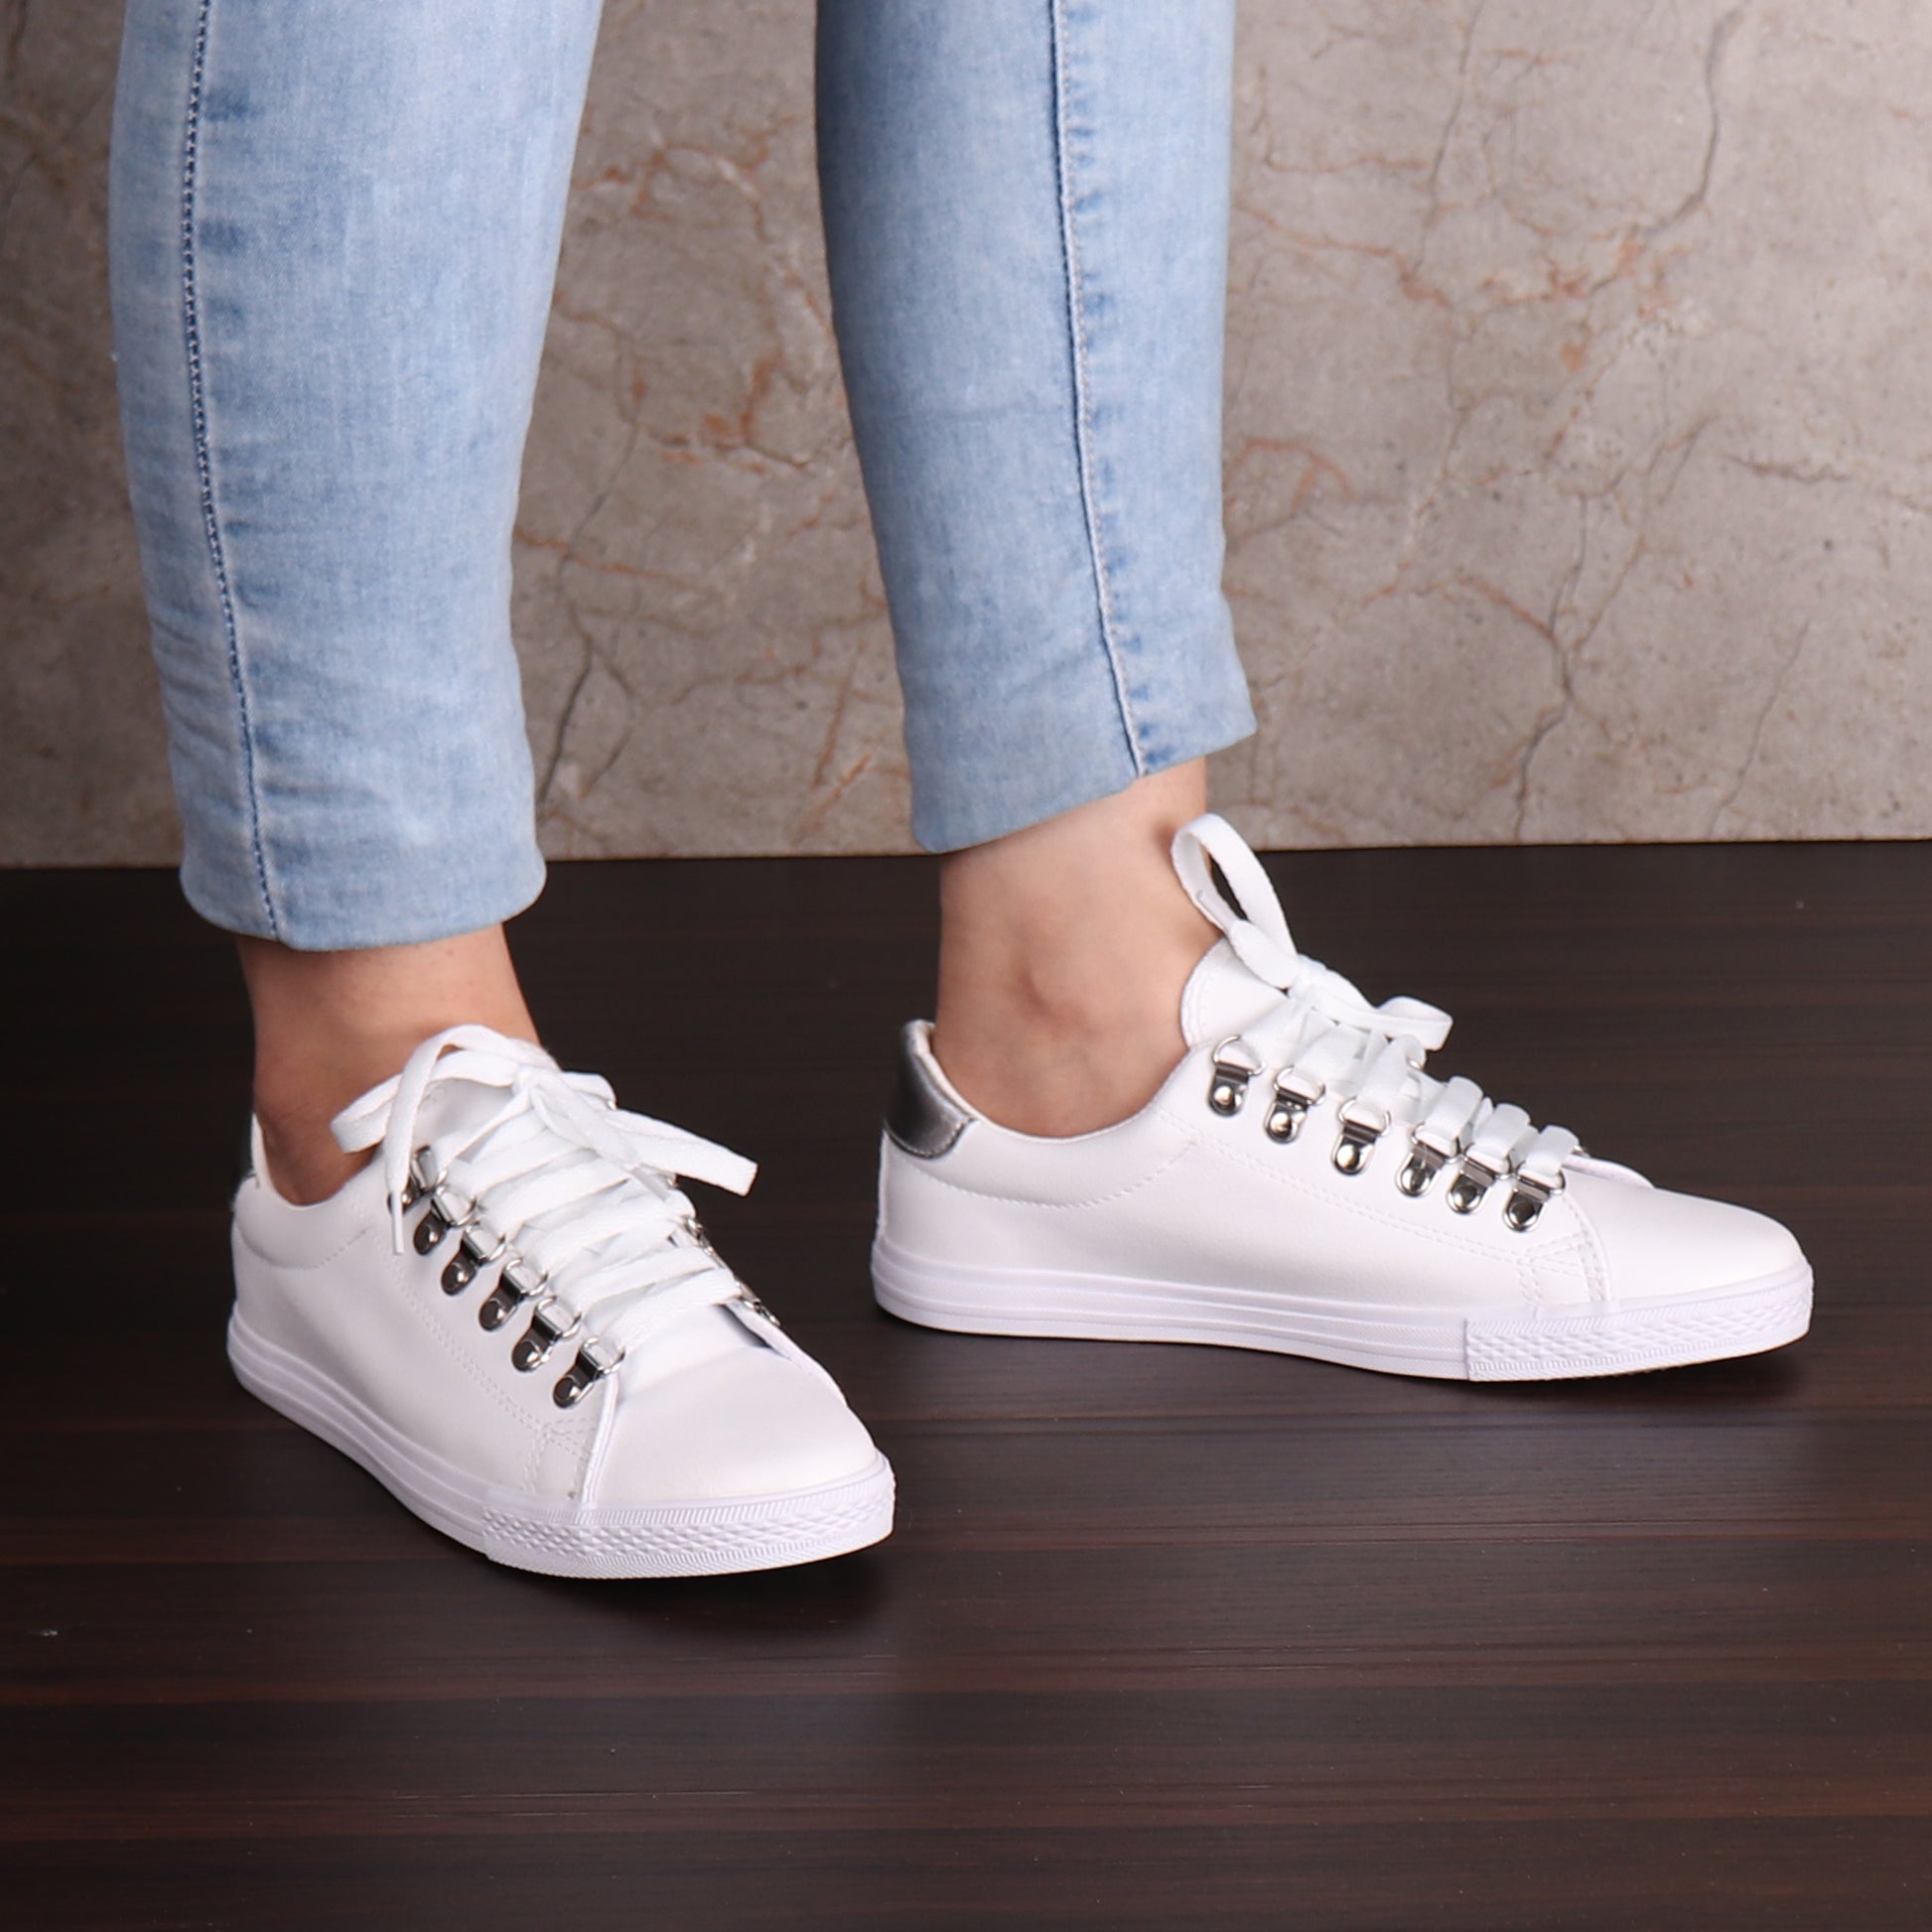 Foot Wear,White Sneaker with Silver Accents - Cippele Multi Store